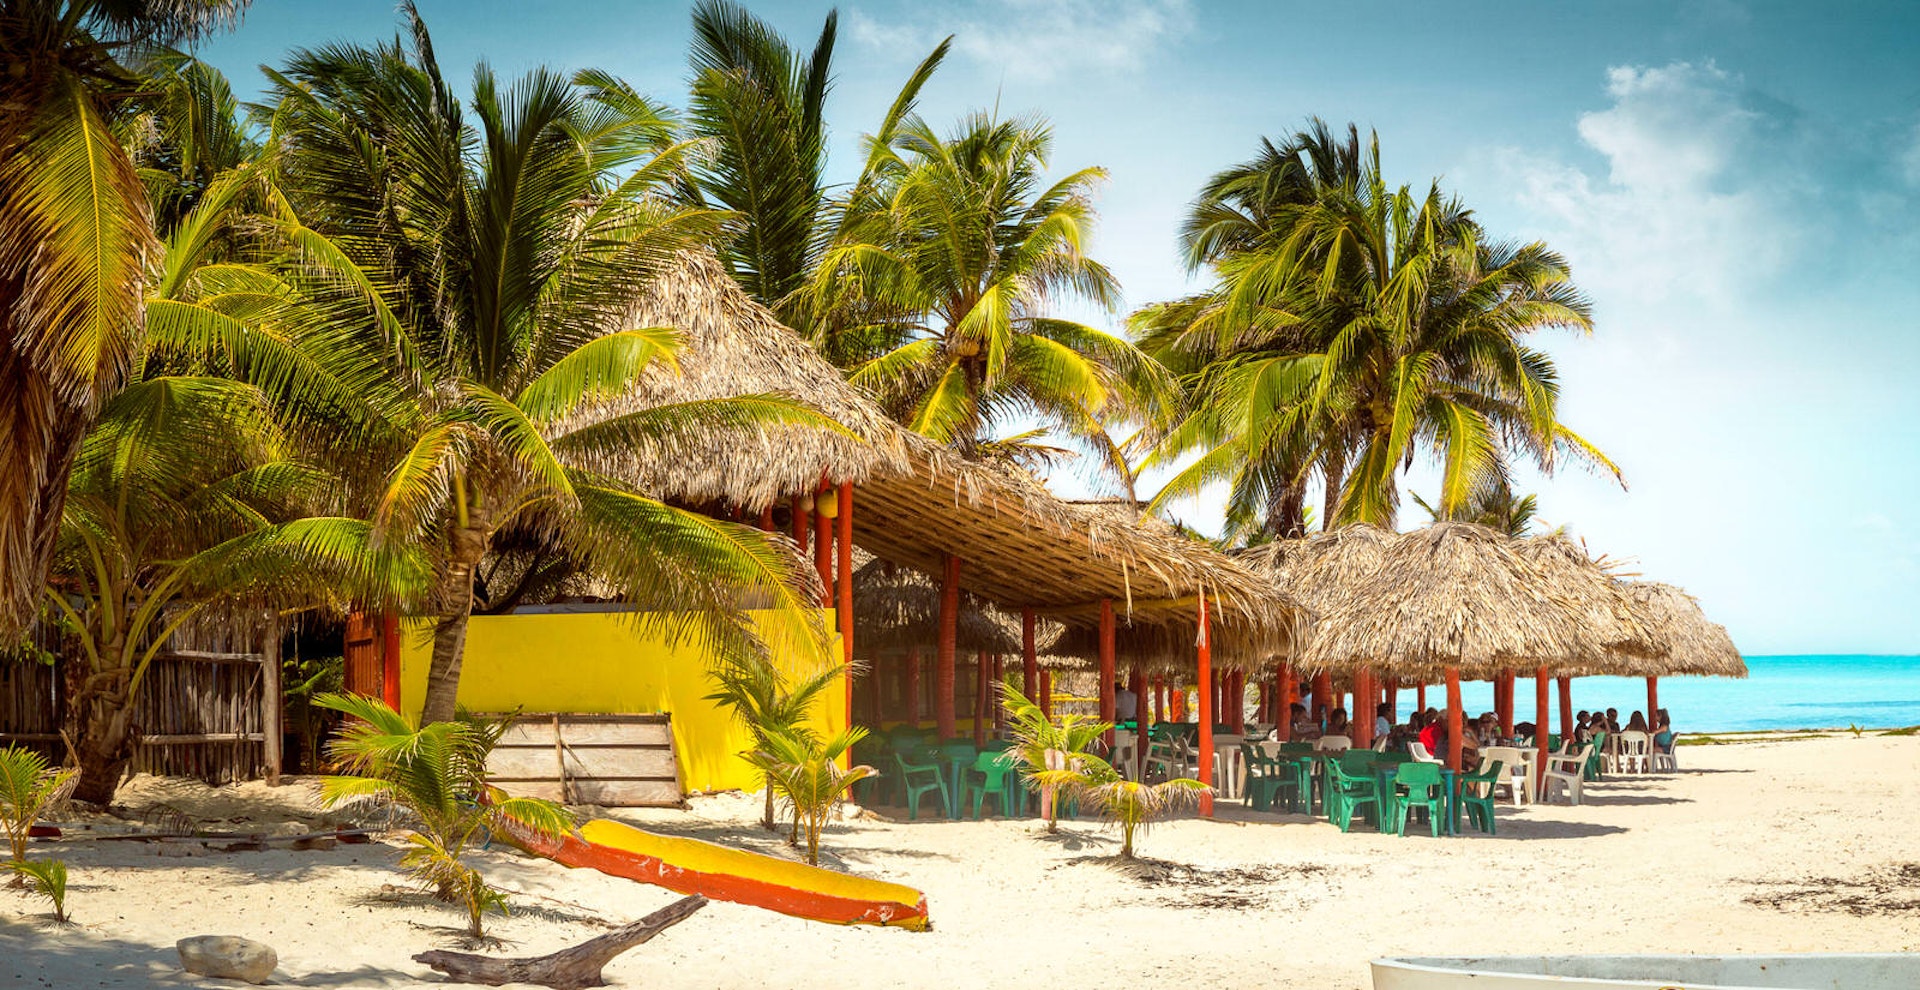 A thatched-roofed tropical bar sits beneath hulking palms on a beach at Cozumel island. The bar is painted bright yellow and red with green and white plastic chairs. It's partly obscured by green palm trees and sits on a white-sand beach with a jewel-blue sea in the background. 